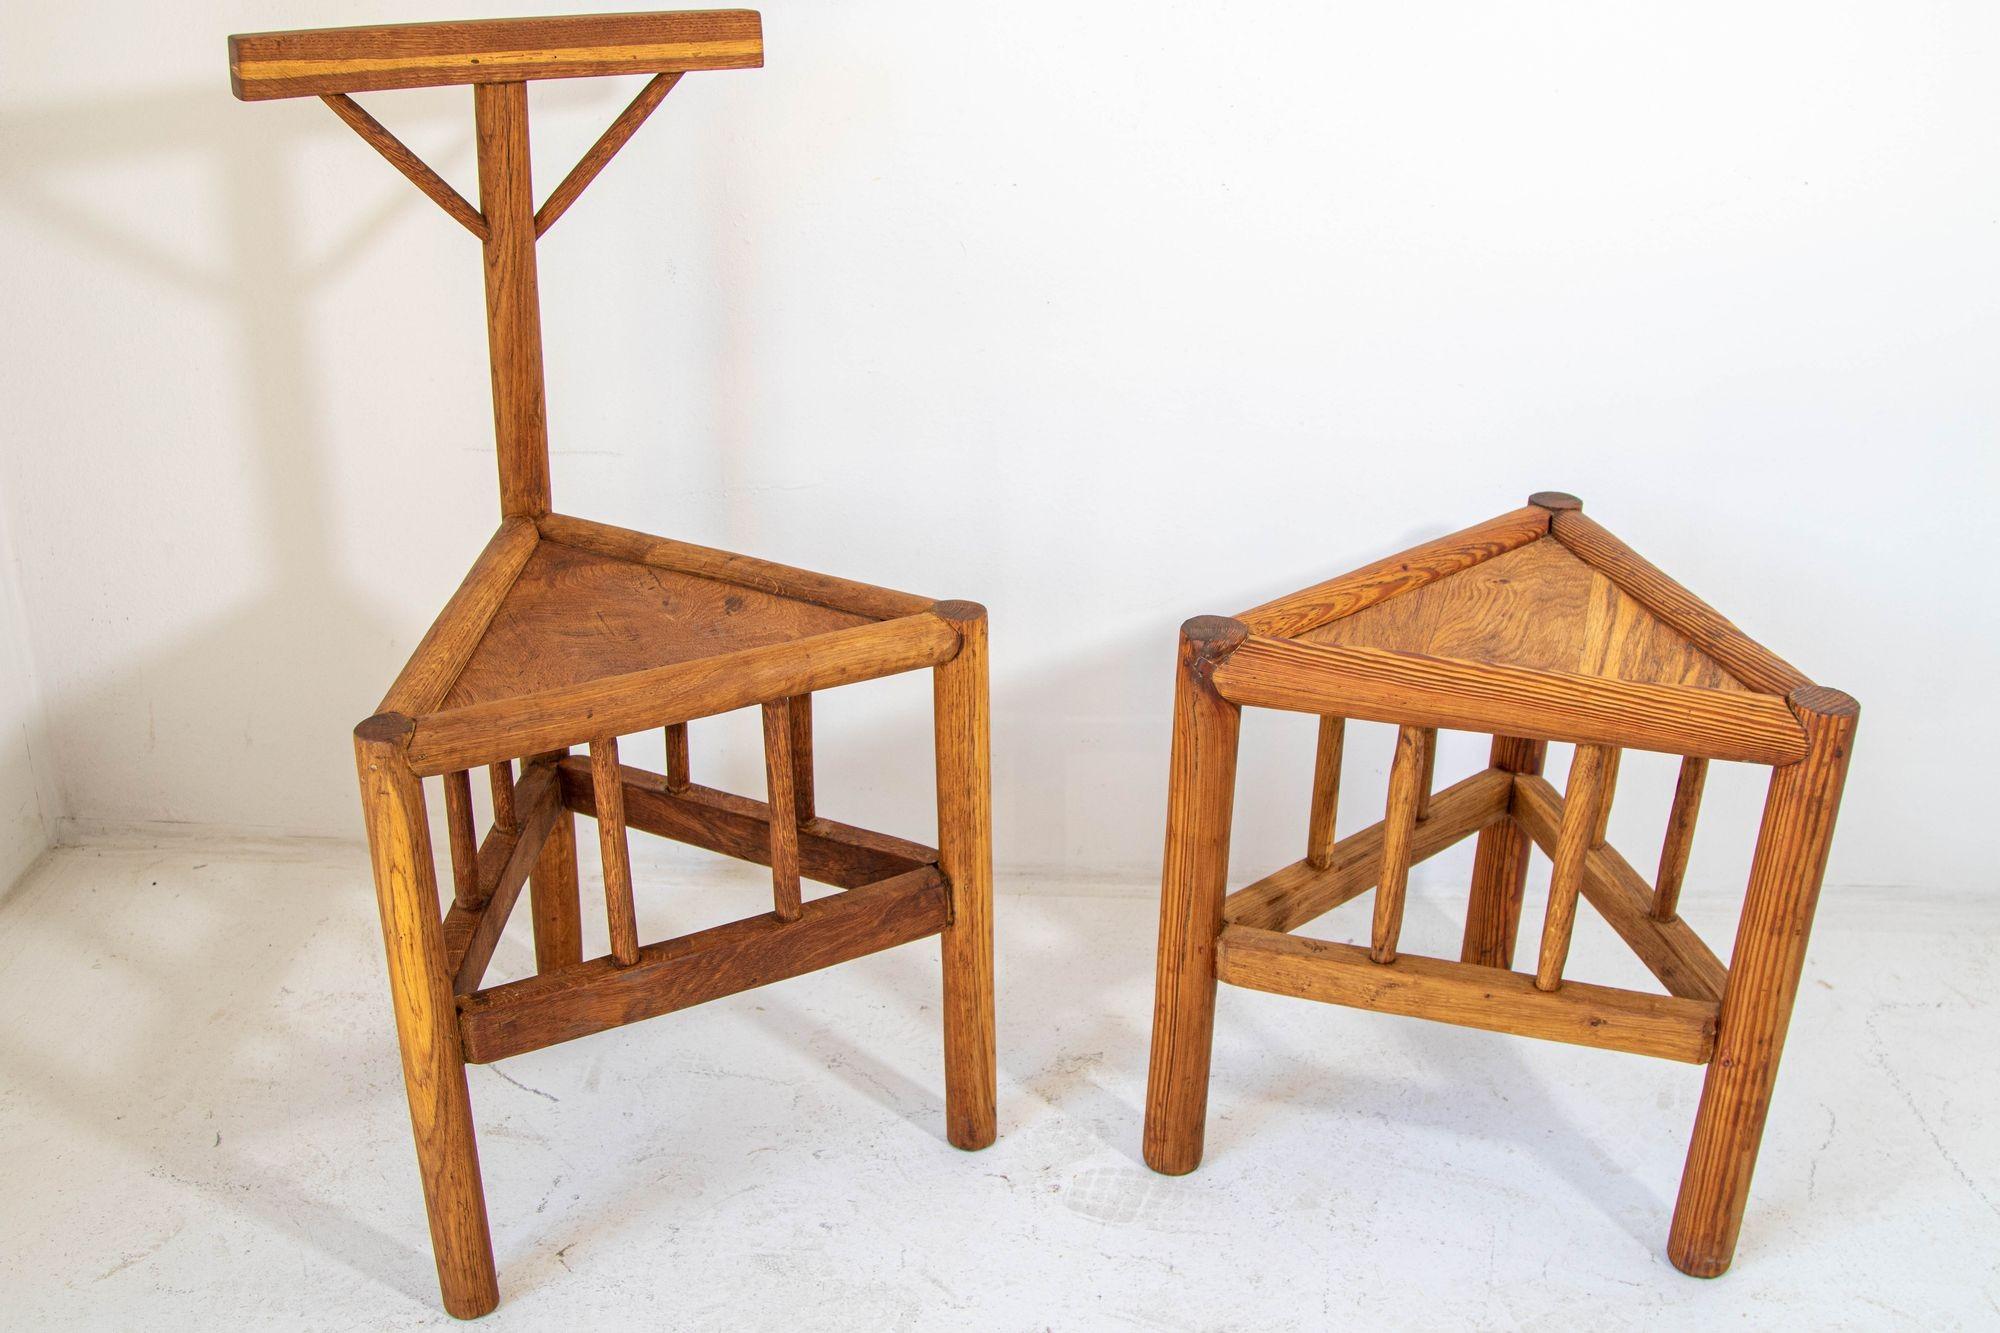 Triangular Mid-Century Swedish chair and stool in the Manner of Charlotte Perriand, circa 1960s.
Set of triangular mid-century chair and stool or side table in oak.
Nordic Sweden Arts and Crafts Style triangular chair and side table or stool.
Set of